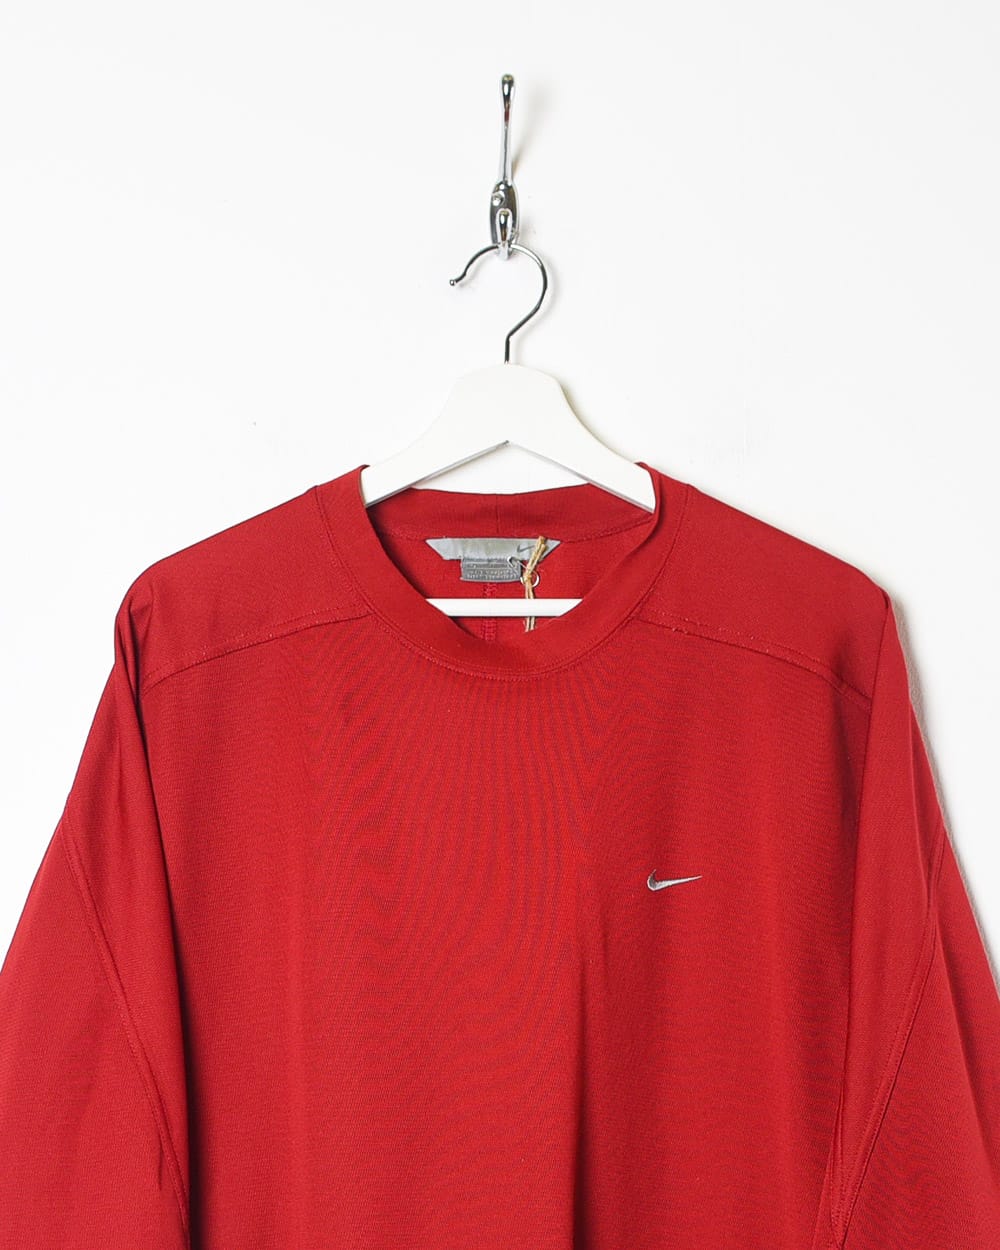 Red Nike Long Sleeved T-Shirt - X-Large